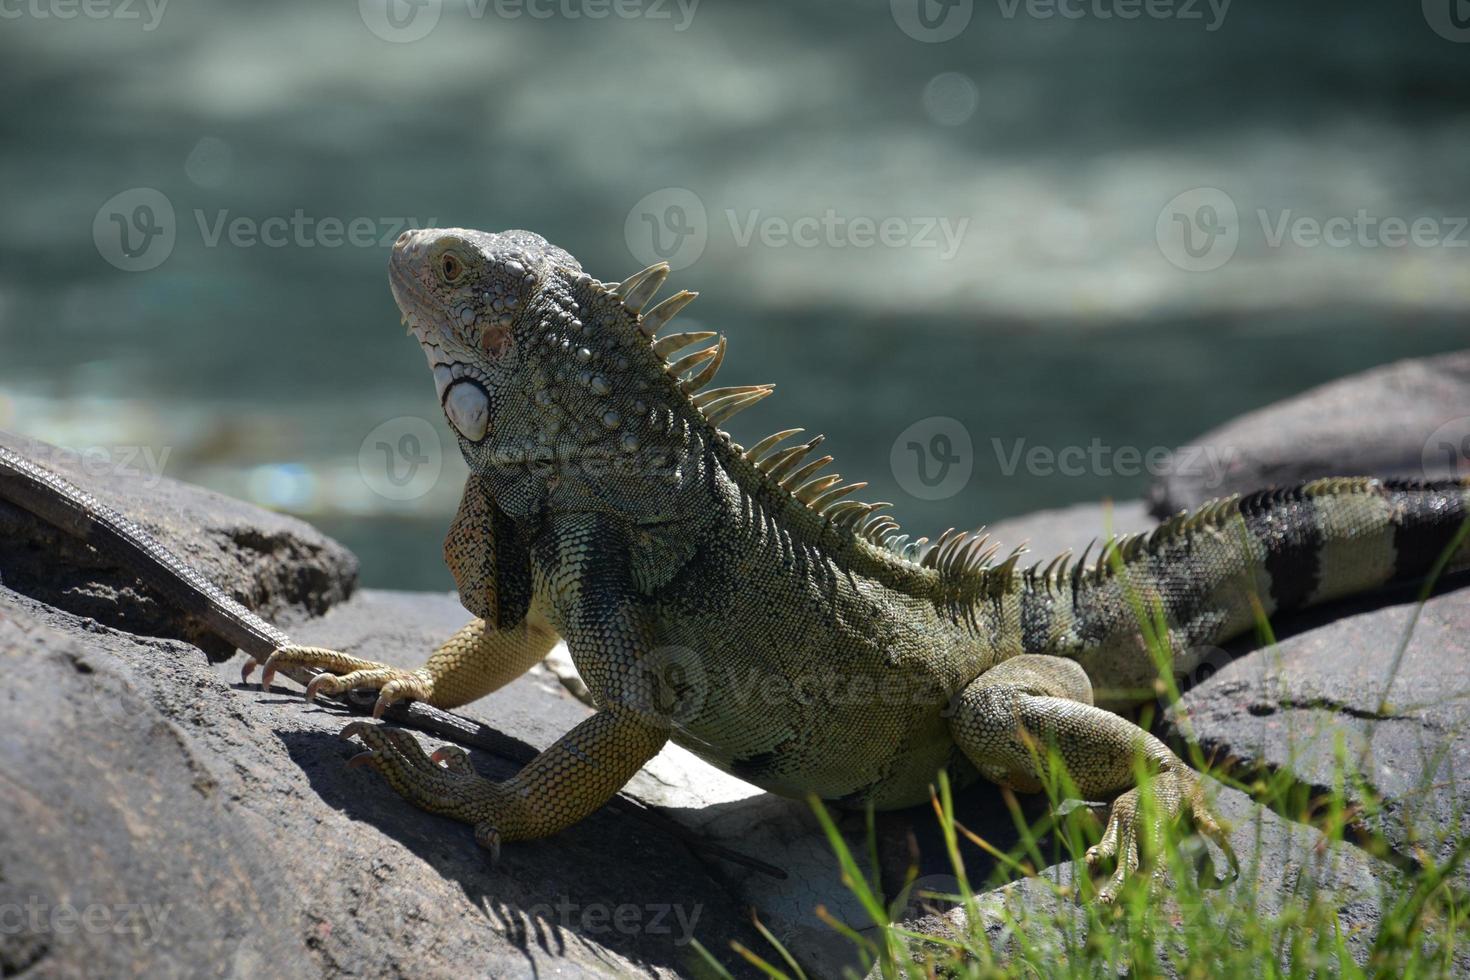 Iguana with Long Toes and Nails on a Rock photo